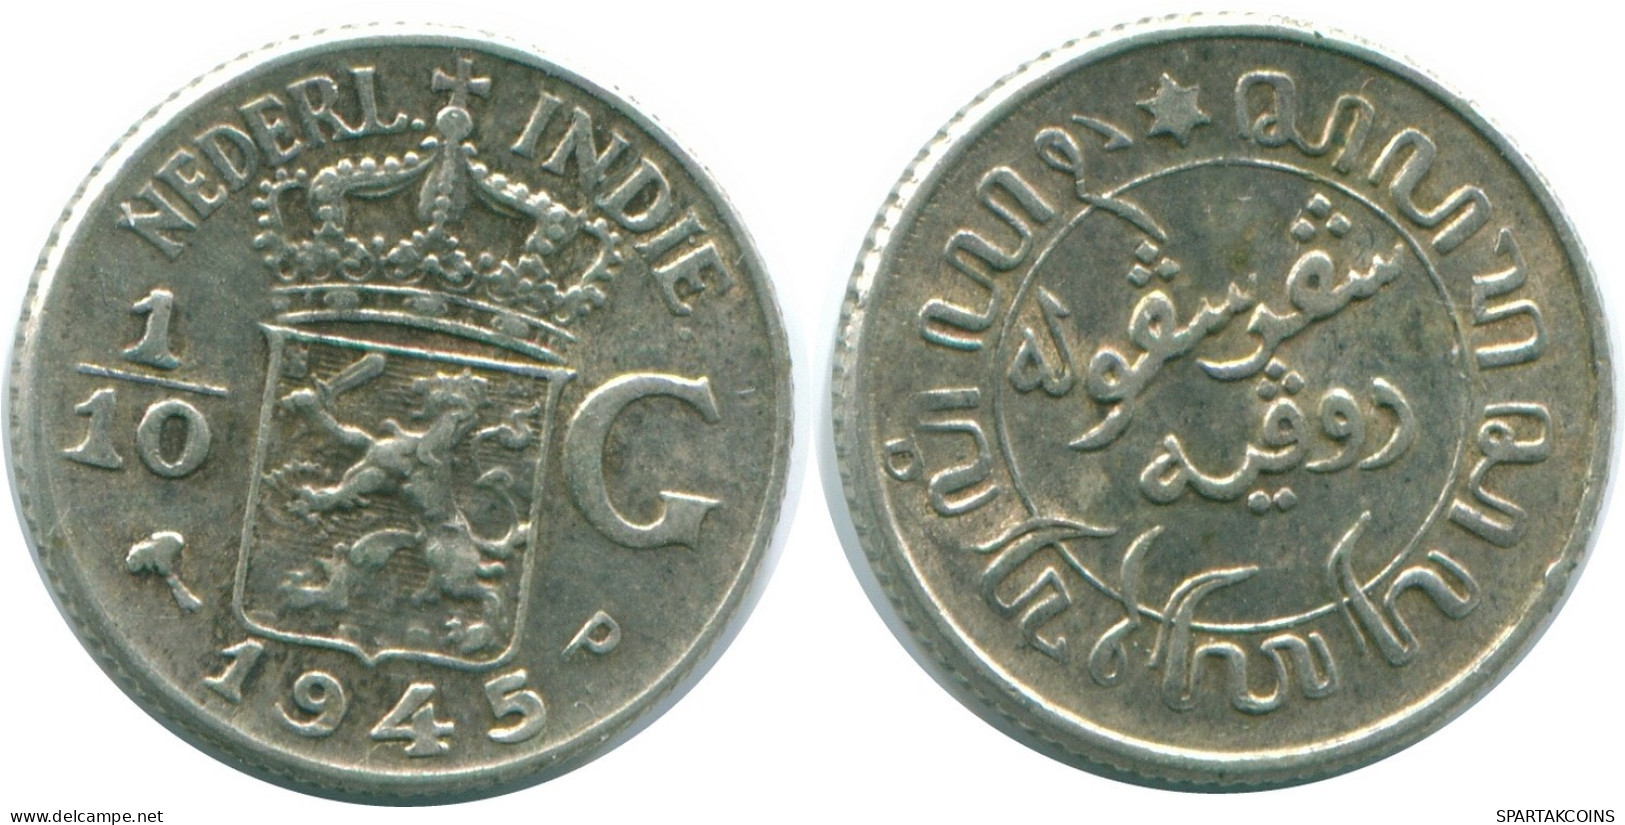 1/10 GULDEN 1945 P NETHERLANDS EAST INDIES SILVER Colonial Coin #NL14224.3.U.A - Indes Neerlandesas